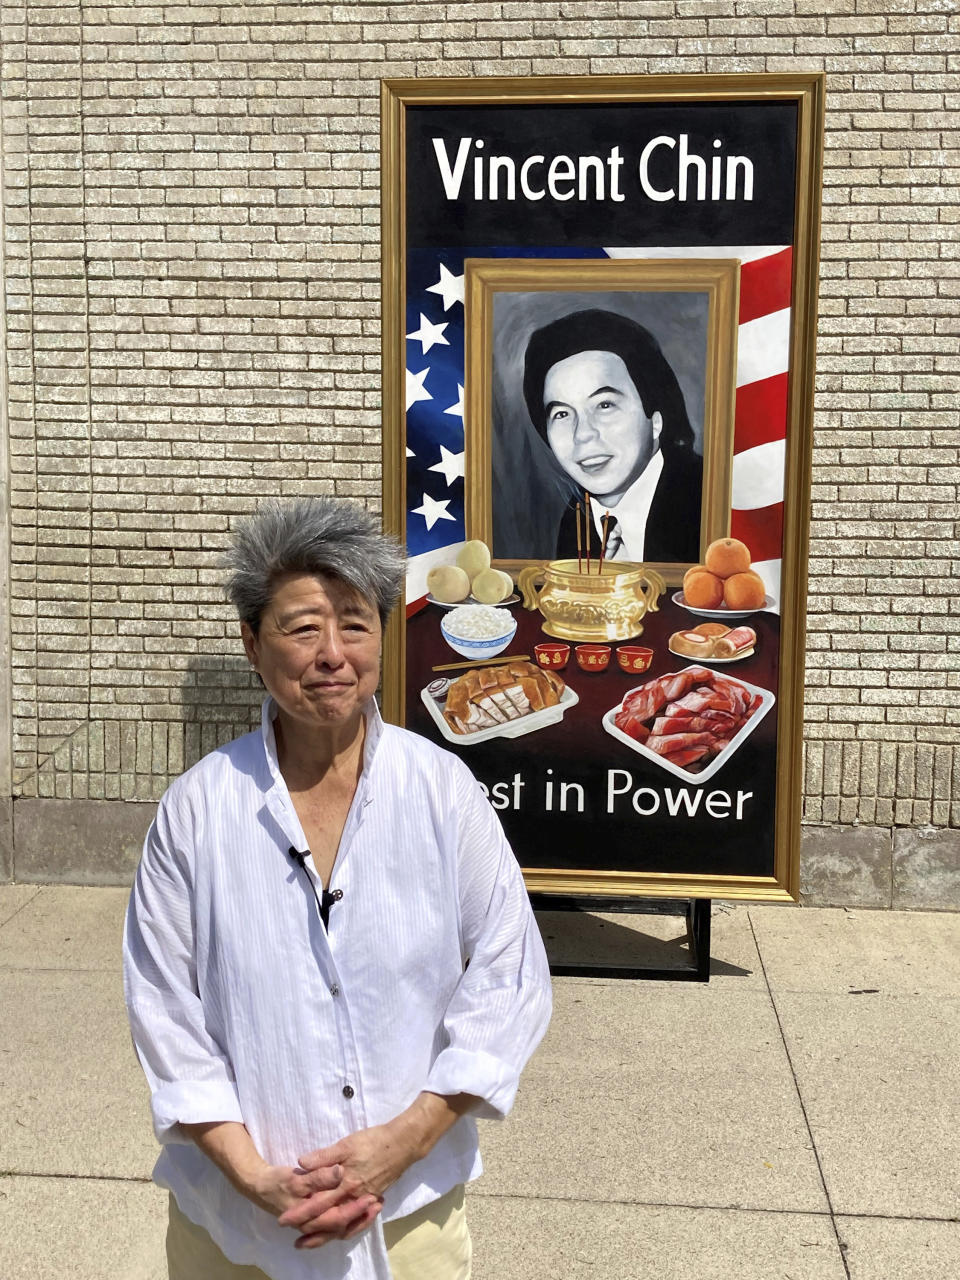 Activist and author Helen Zia poses Thursday, June 15, 2022, next to a painting of Vincent Chin in Detroit. The city is partnering with The Vincent Chin 40th Remembrance & Rededication Coalition to honor civil rights efforts that began with Chin's 1982 slaying. Chin, a Chinese American, was beaten to death in Detroit by two white men who never served jail time. The commemoration comes as hate crimes against Asian Americans are on the rise in the U.S. (AP Photo/Corey Williams)